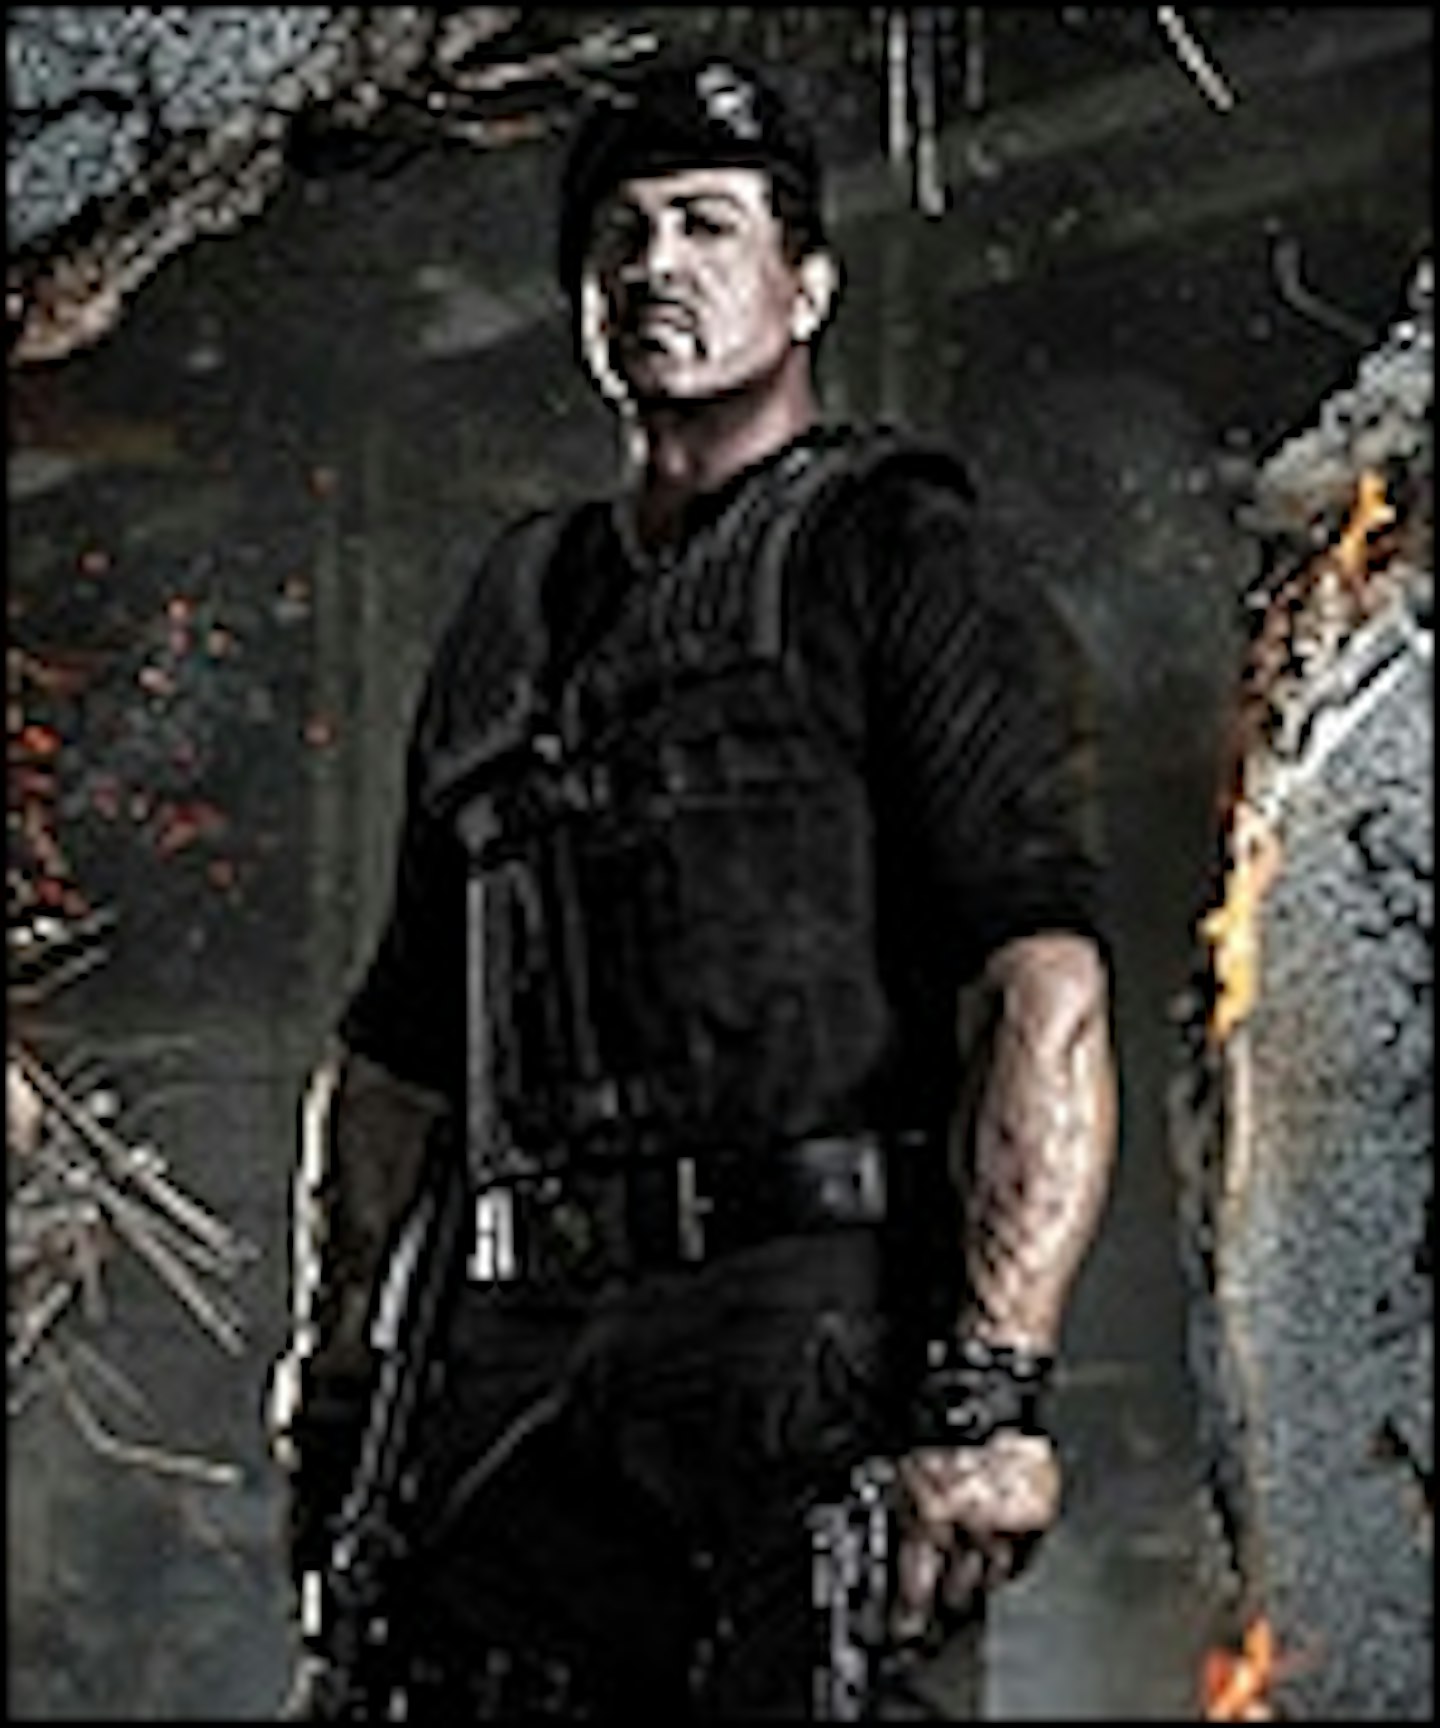 Expendables 2 Will Be PG-13